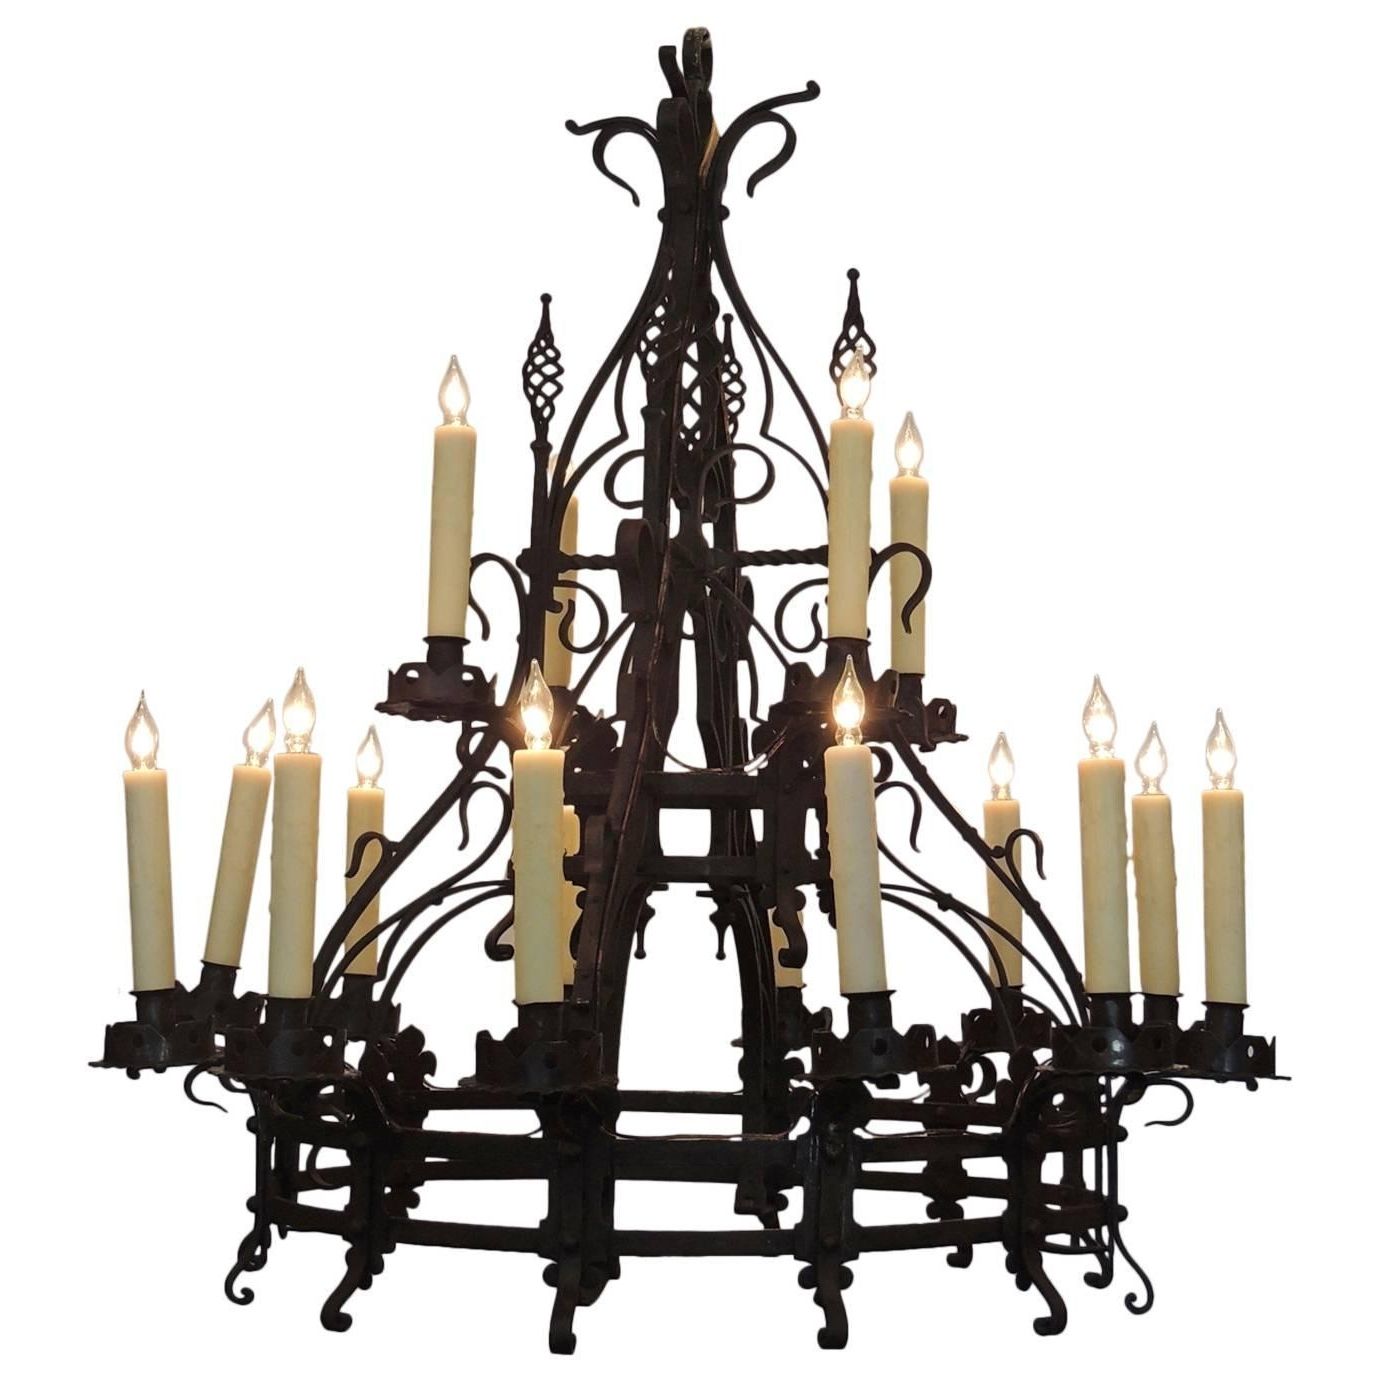 Late 19th C French Gothic Wrought Iron Chandelier For Sale At 1stdibs Regarding 2017 Wrought Iron Chandelier (View 9 of 15)